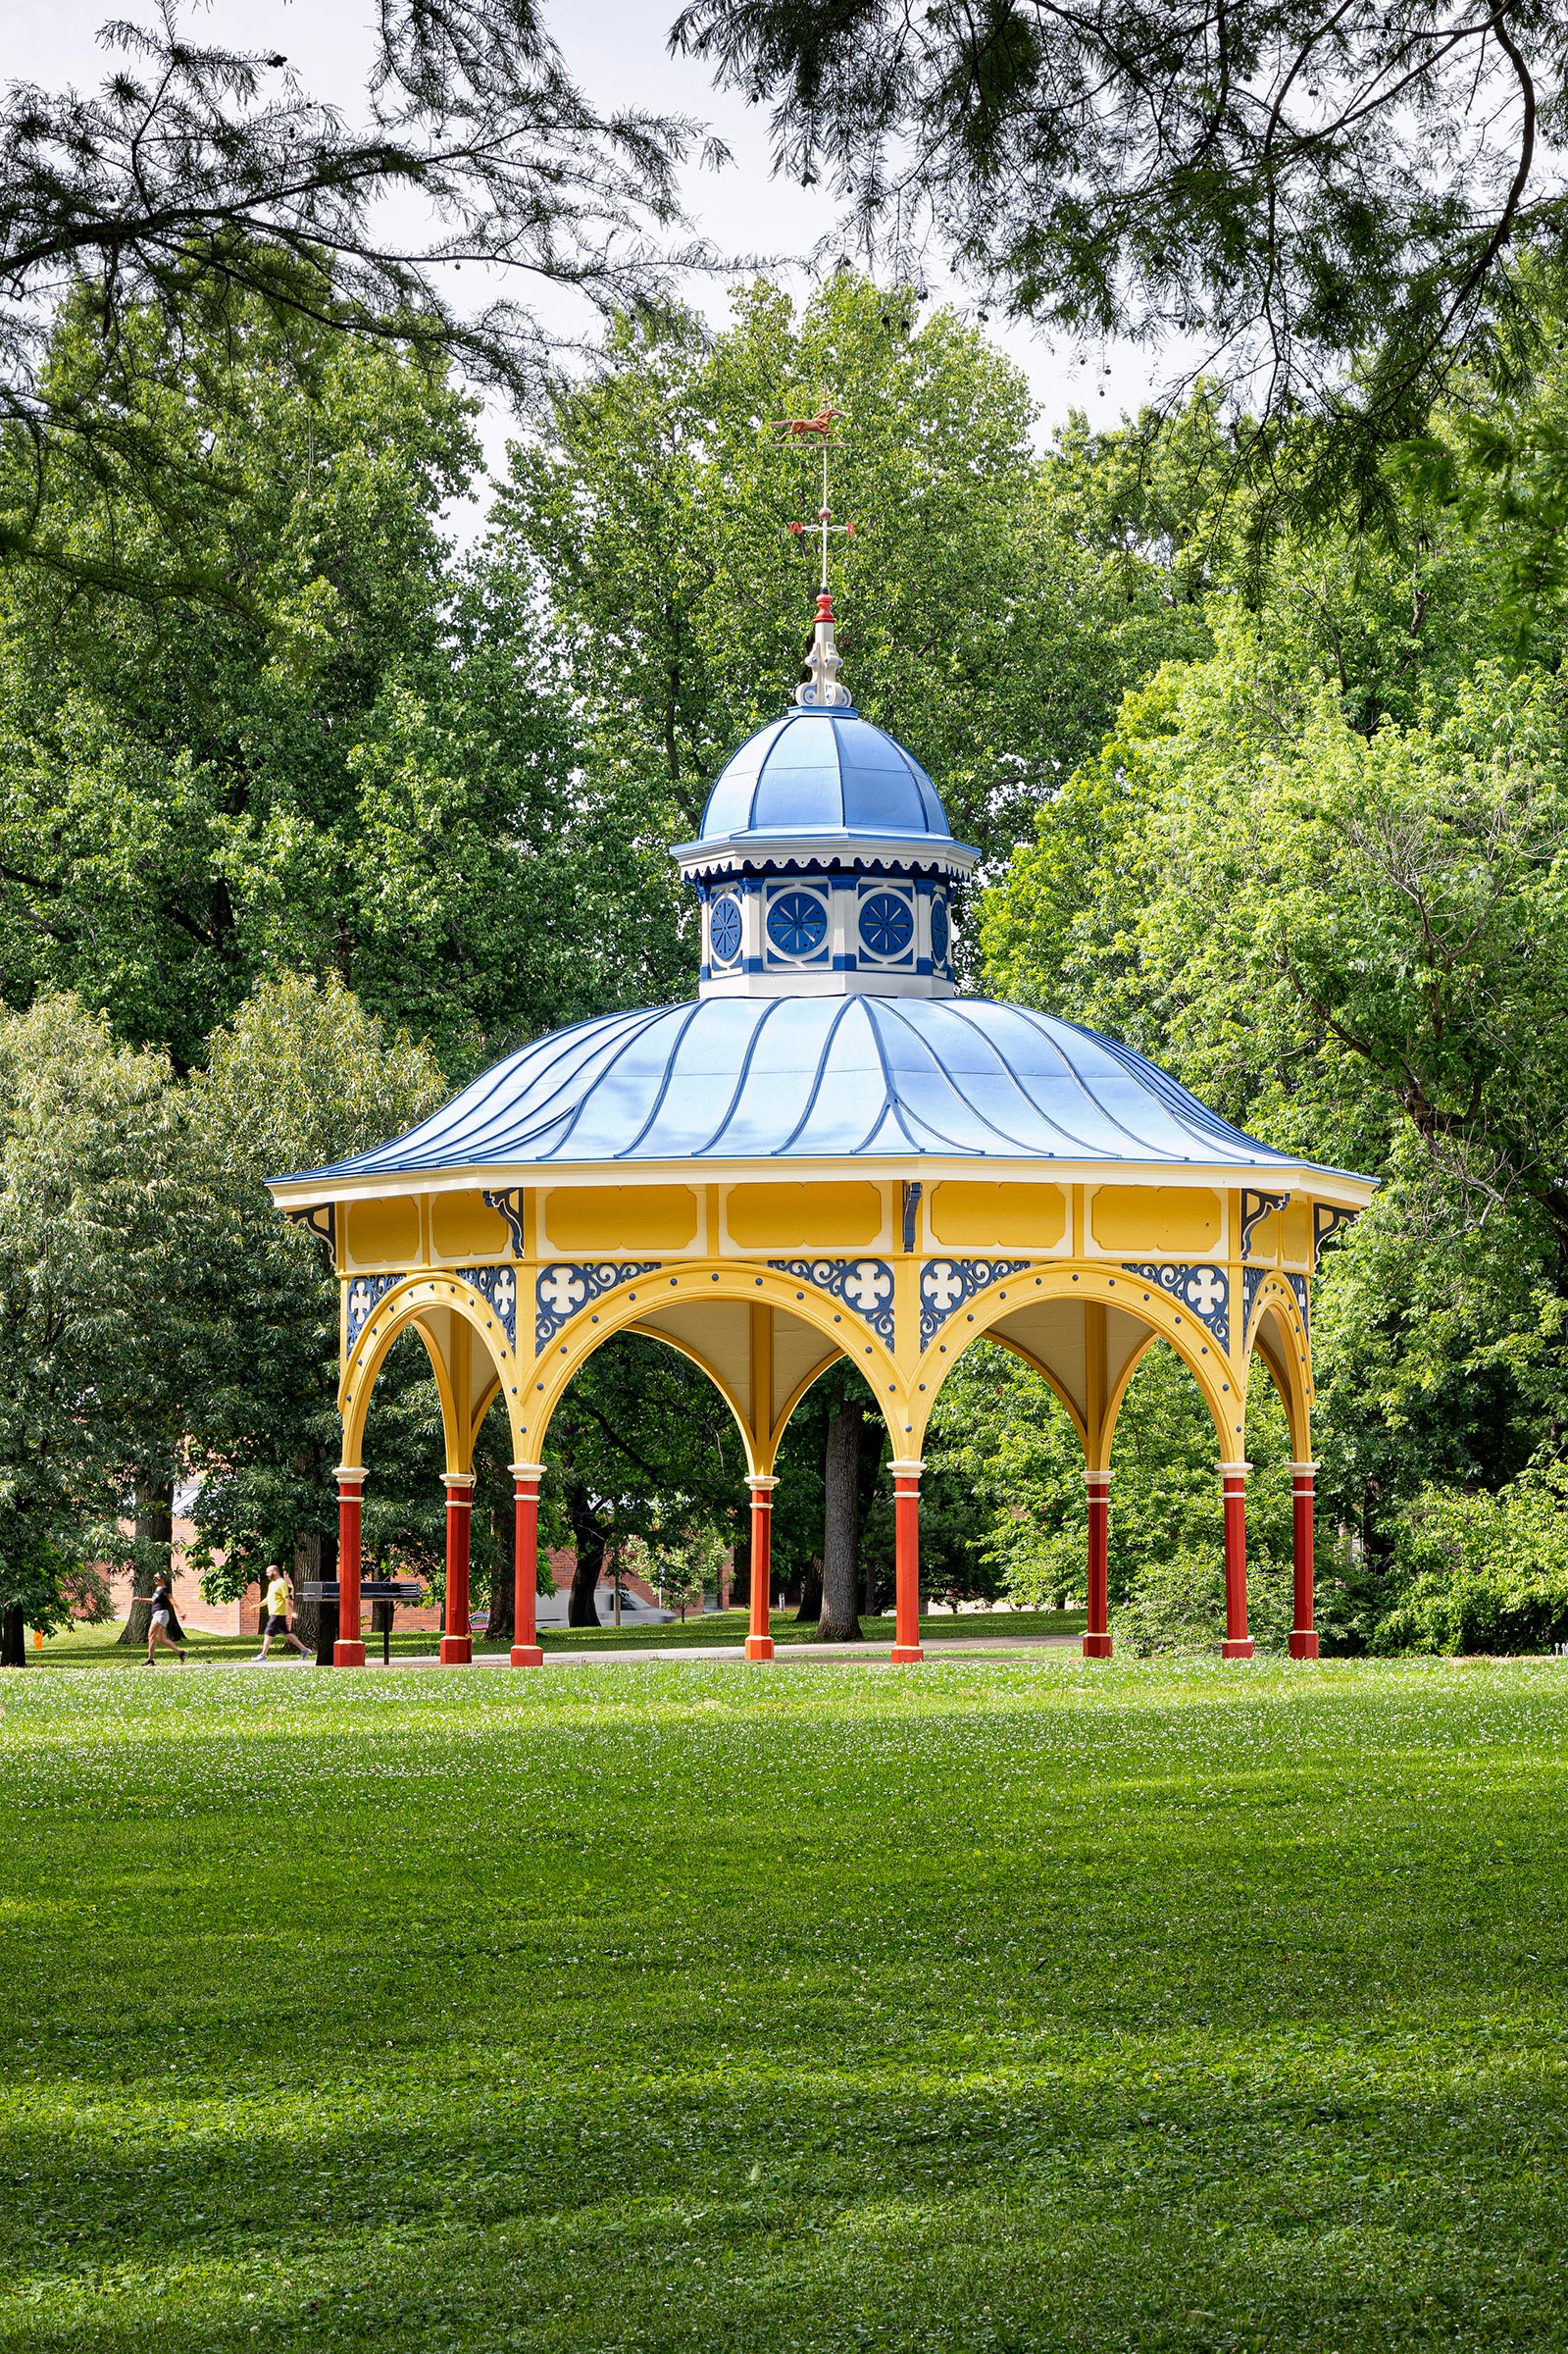 Old Playground Pavilion - Designed by Trivers in Tower Grove Park